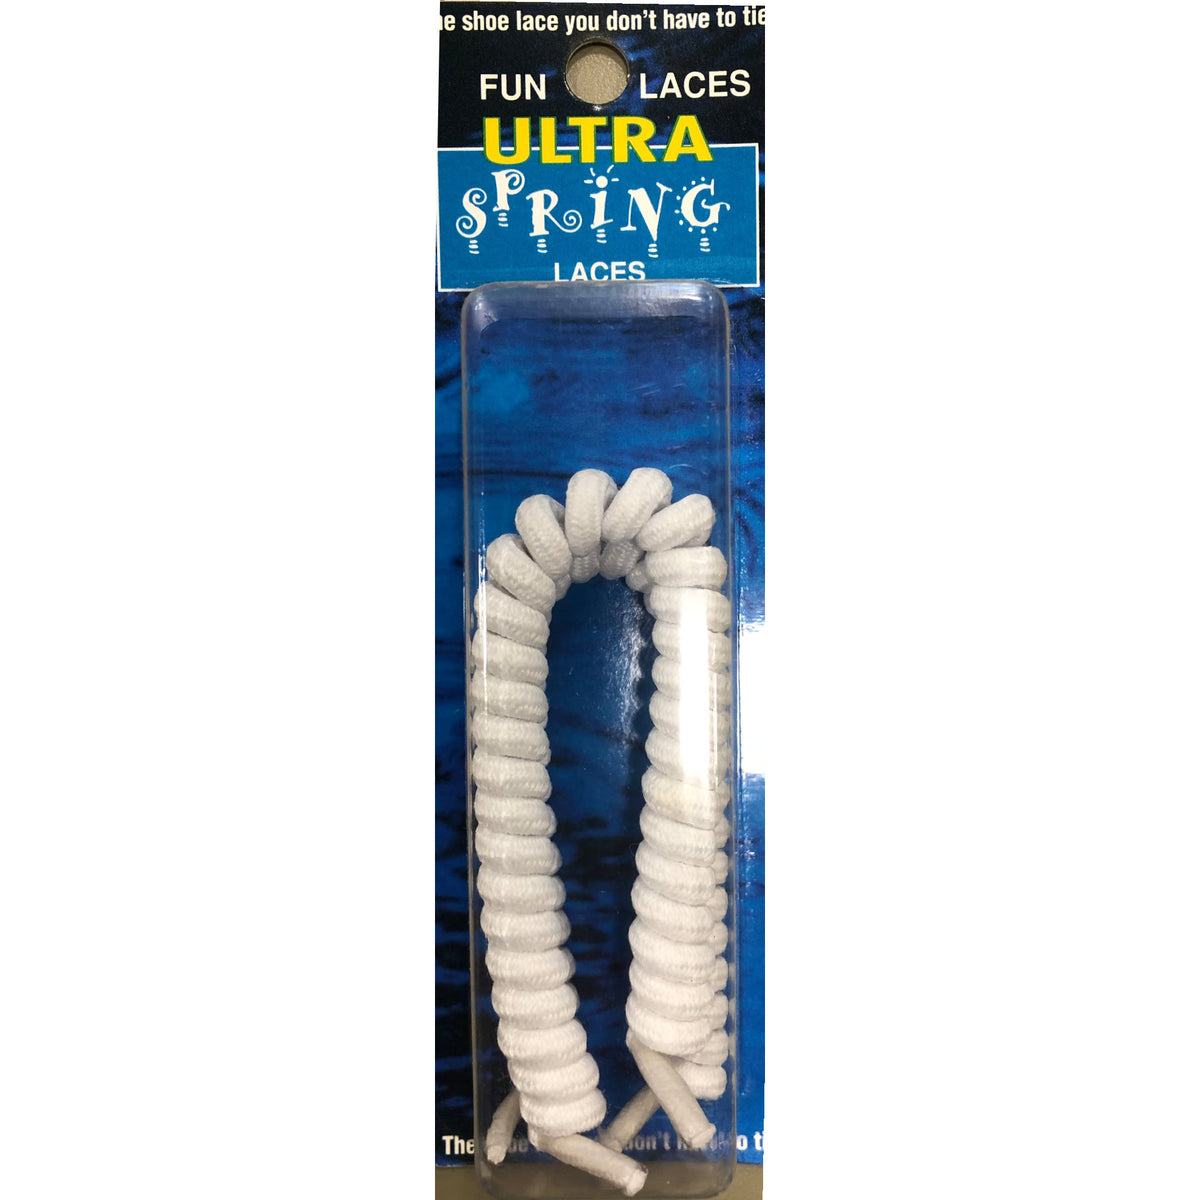 Packaging of a pair of white FRANKFORD LEATHER PACKAGED SPRINGS LACES advertised as &quot;fun laces&quot; that do not require tying.